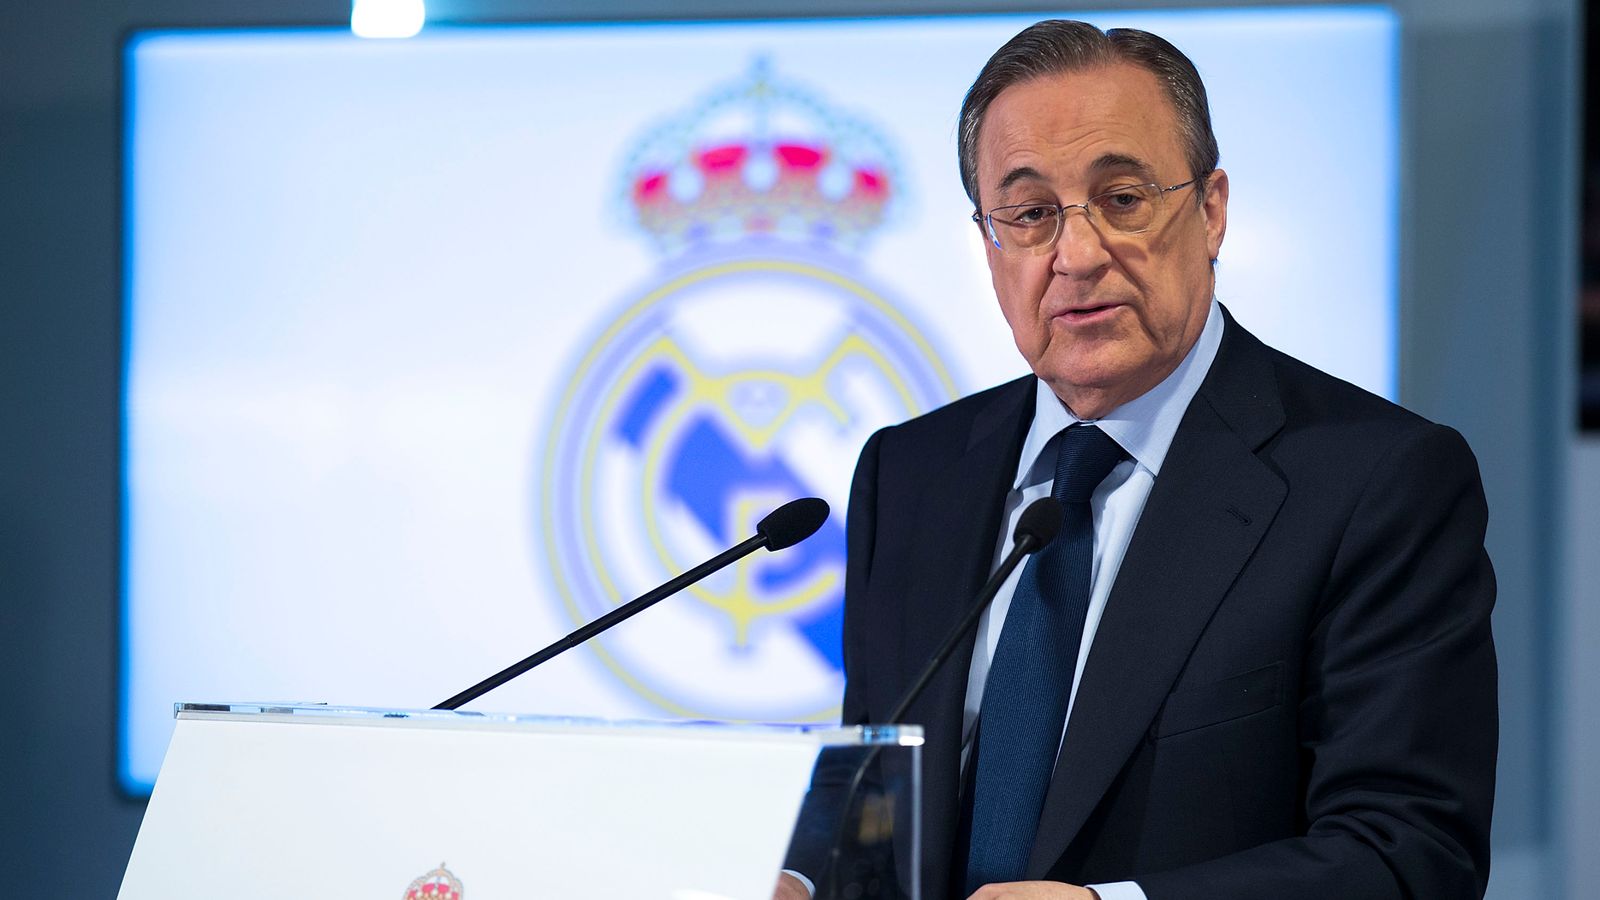 Real Madrid boss Perez names new UCL design 'ludicrous'